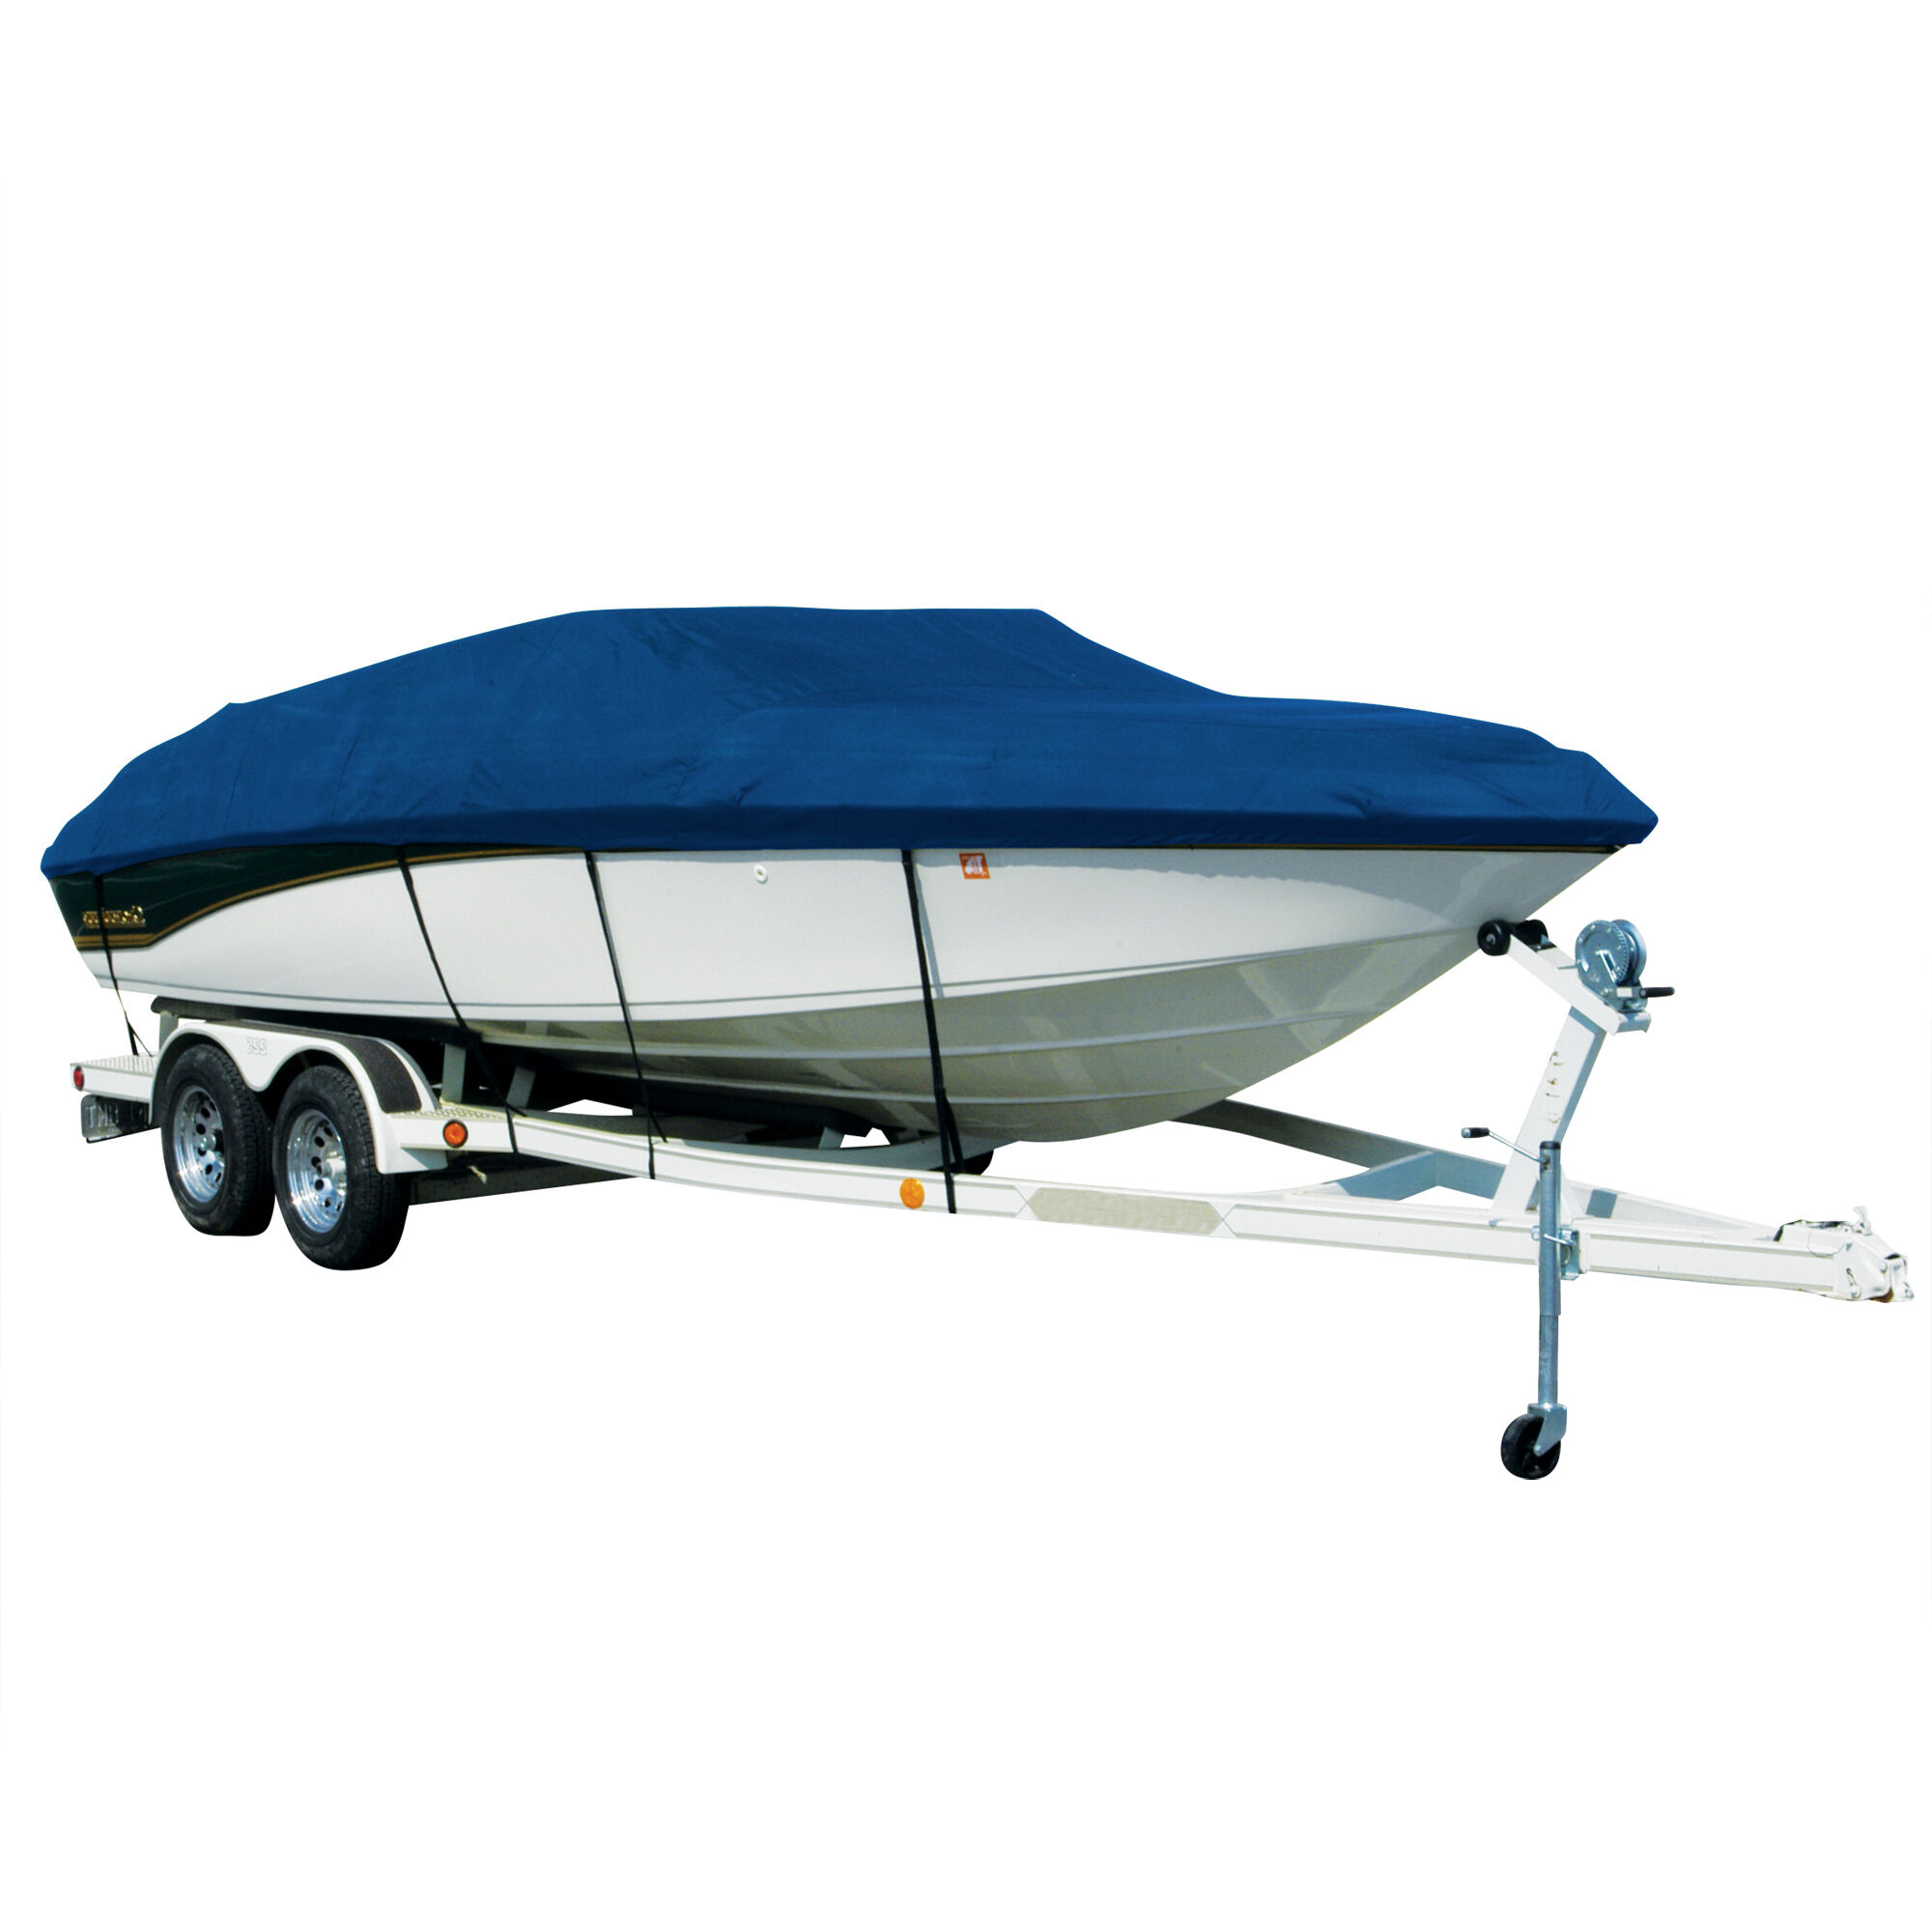 Covermate Sharkskin Boat Cover For Moomba Boomerang Cb (Does Not Cover PLATFORMm) in Royal Grey Heather